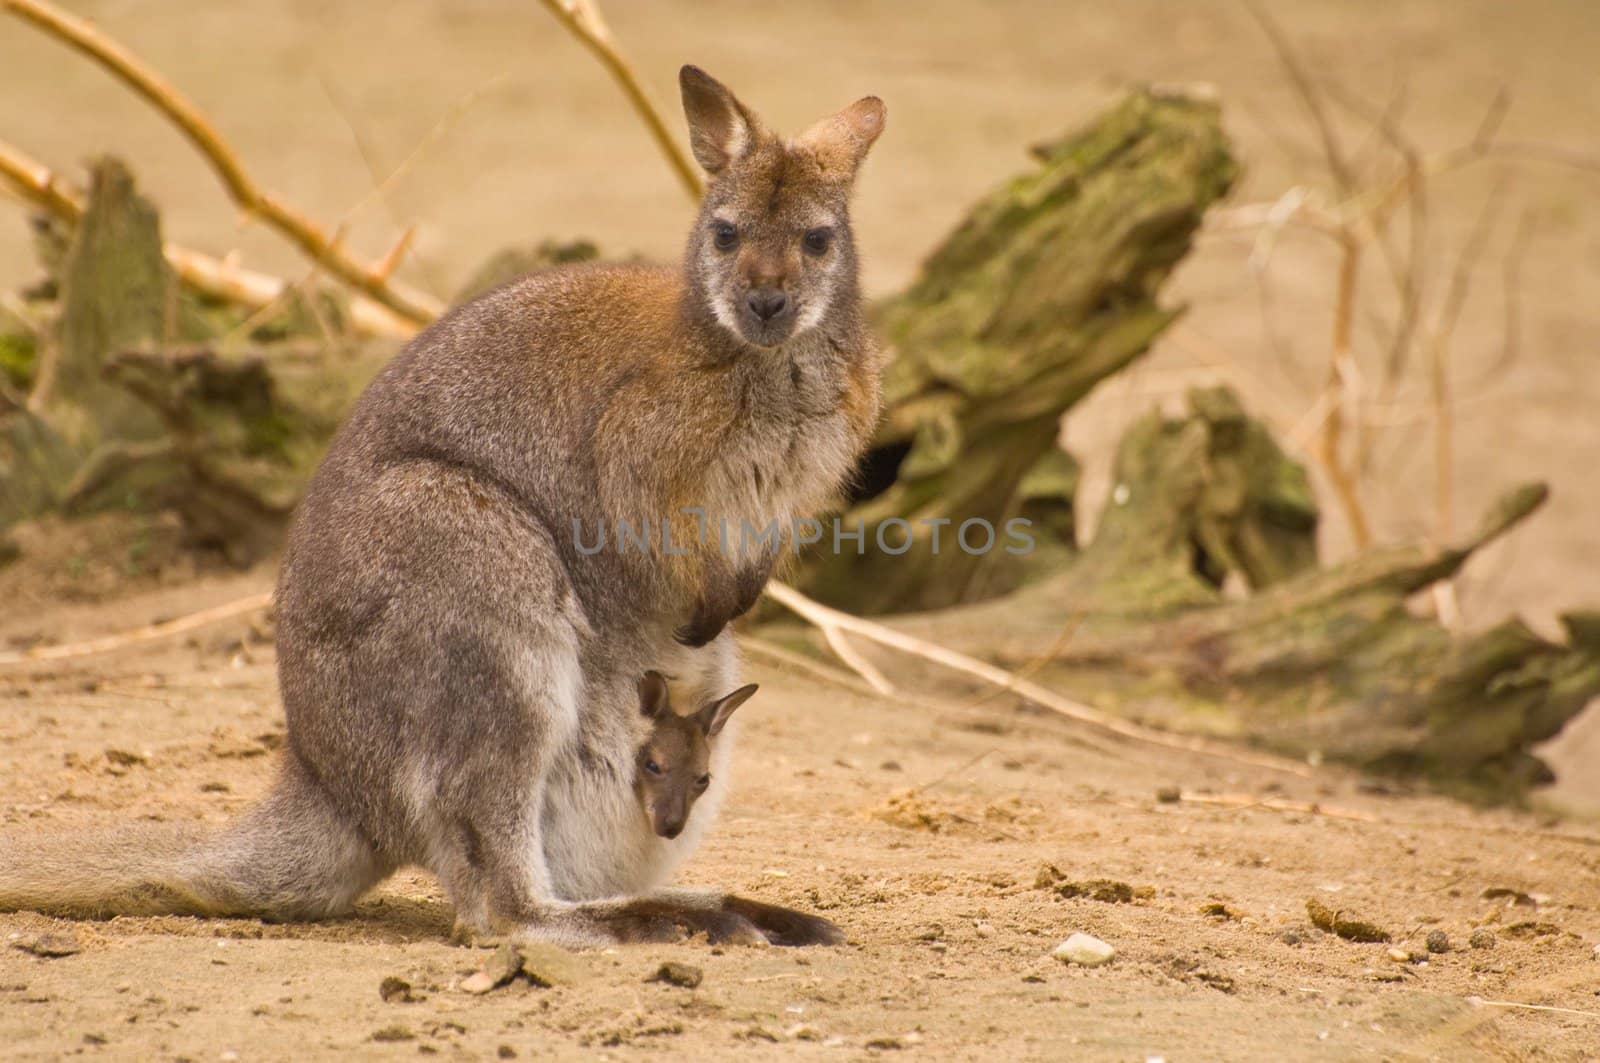 Bennet-wallabie with young in pouch